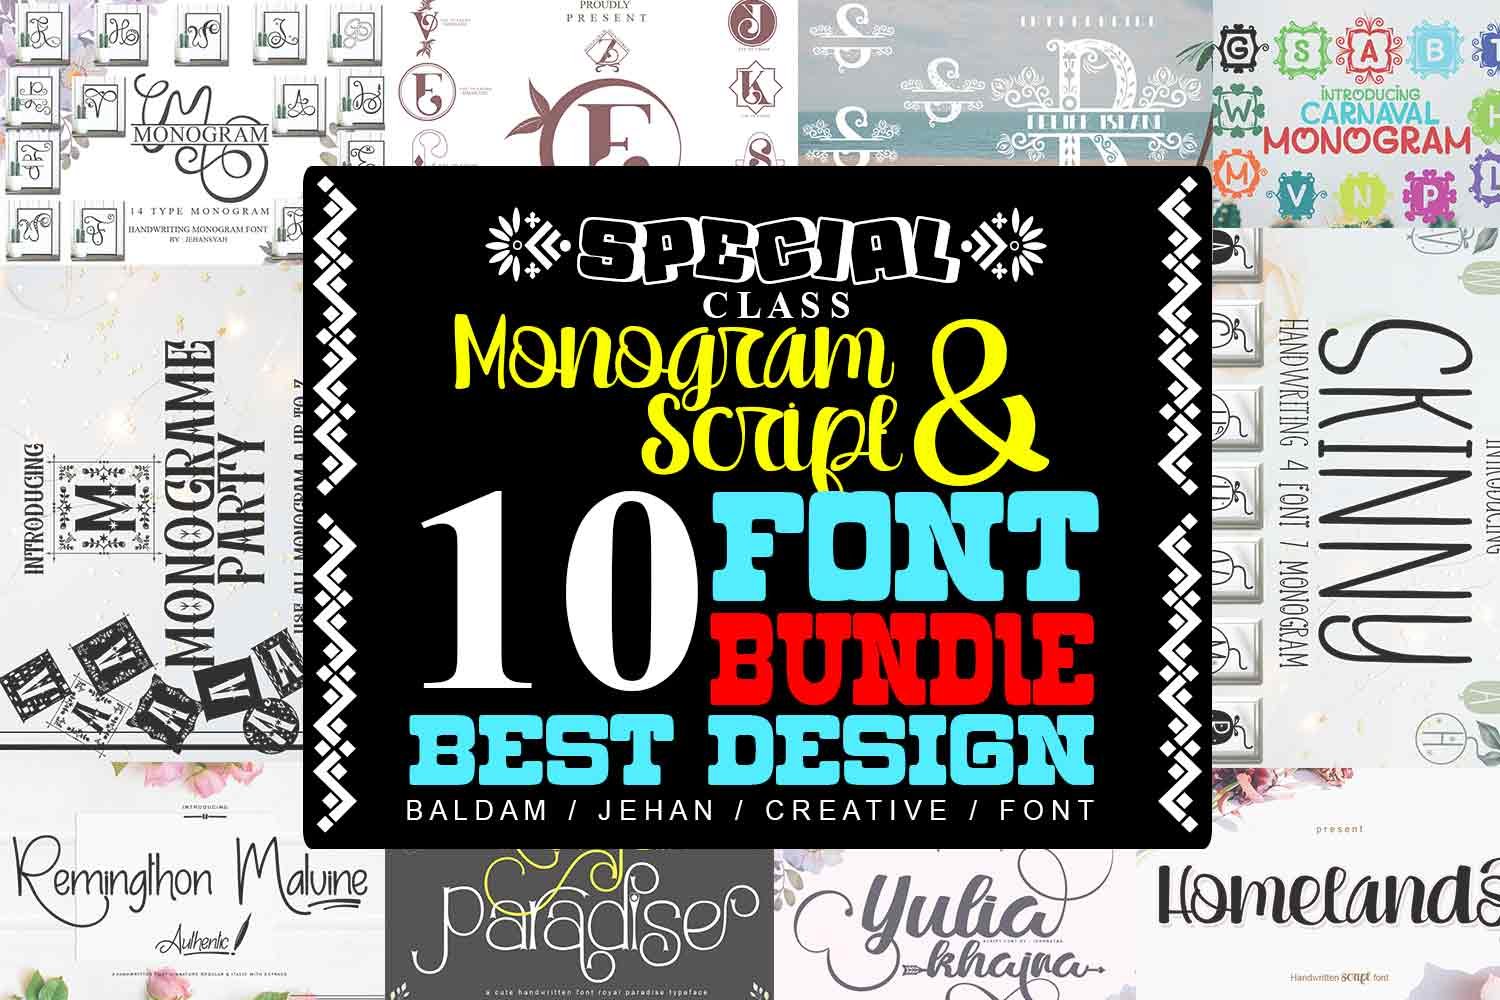 Special Collection 10 Font Bundle cover image.